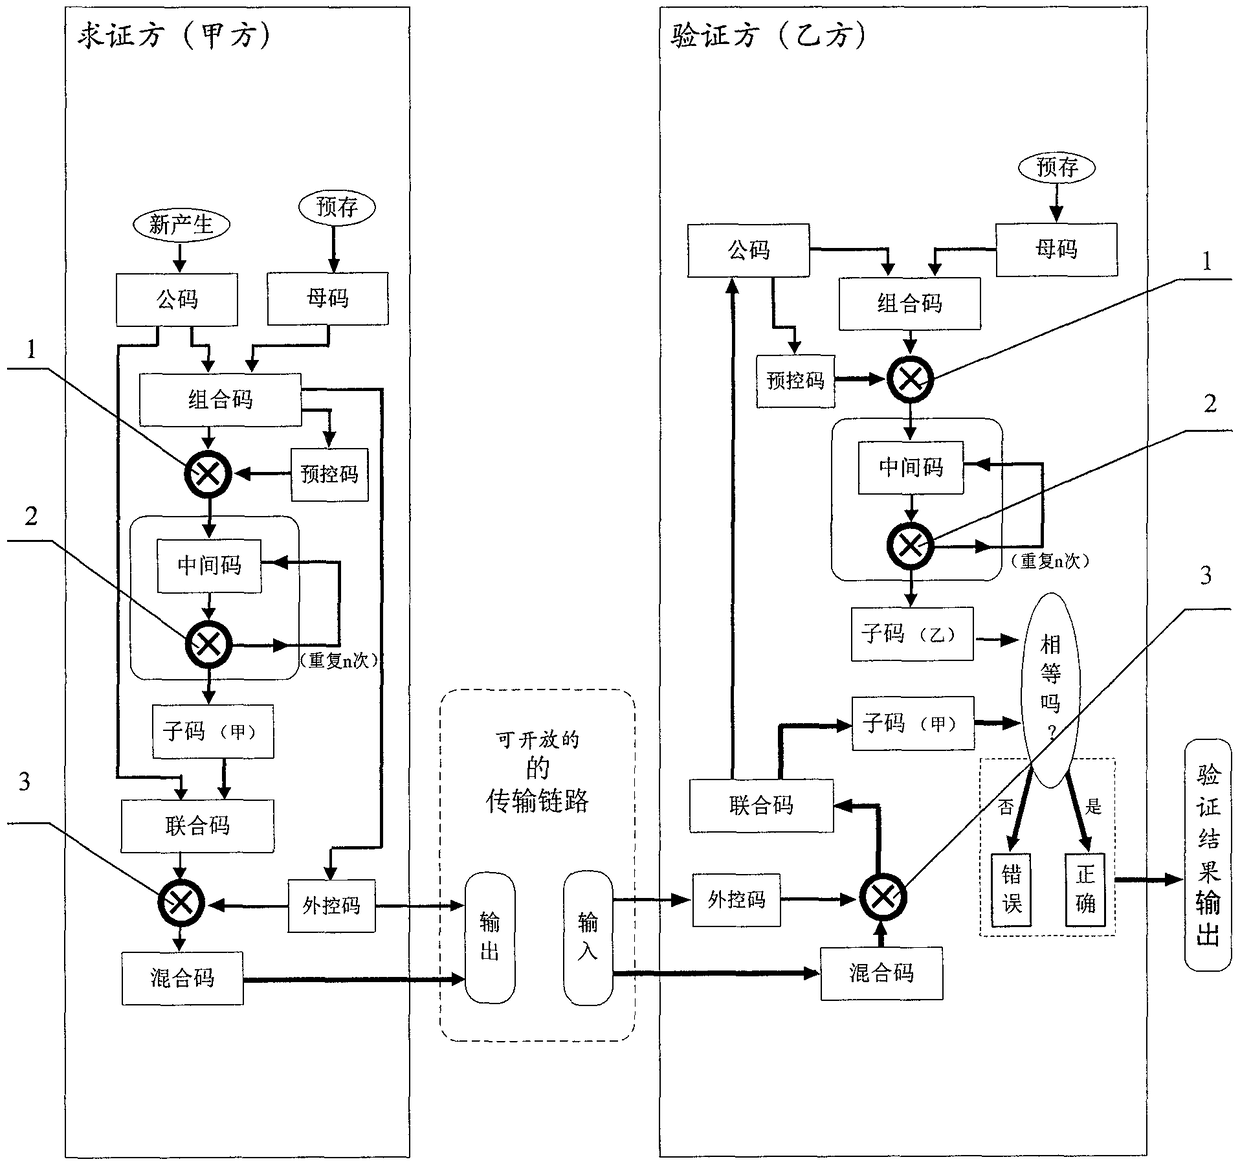 Coding Convention Controlled Authentication and Coding Convention Controlled Encryption